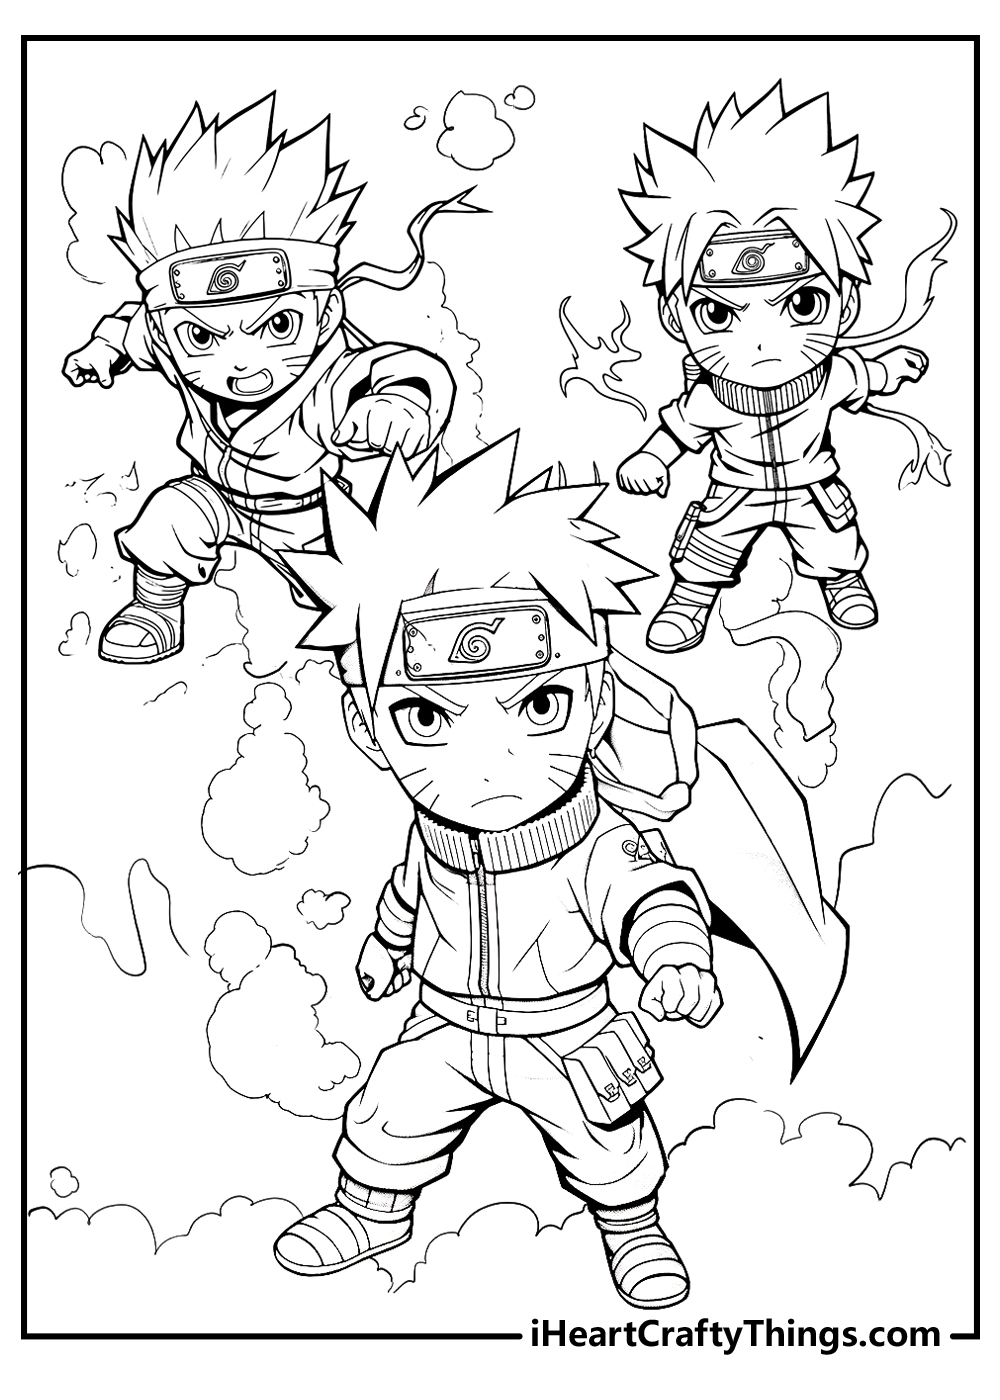 Naruto Printable Coloring Pages - Get Coloring Pages